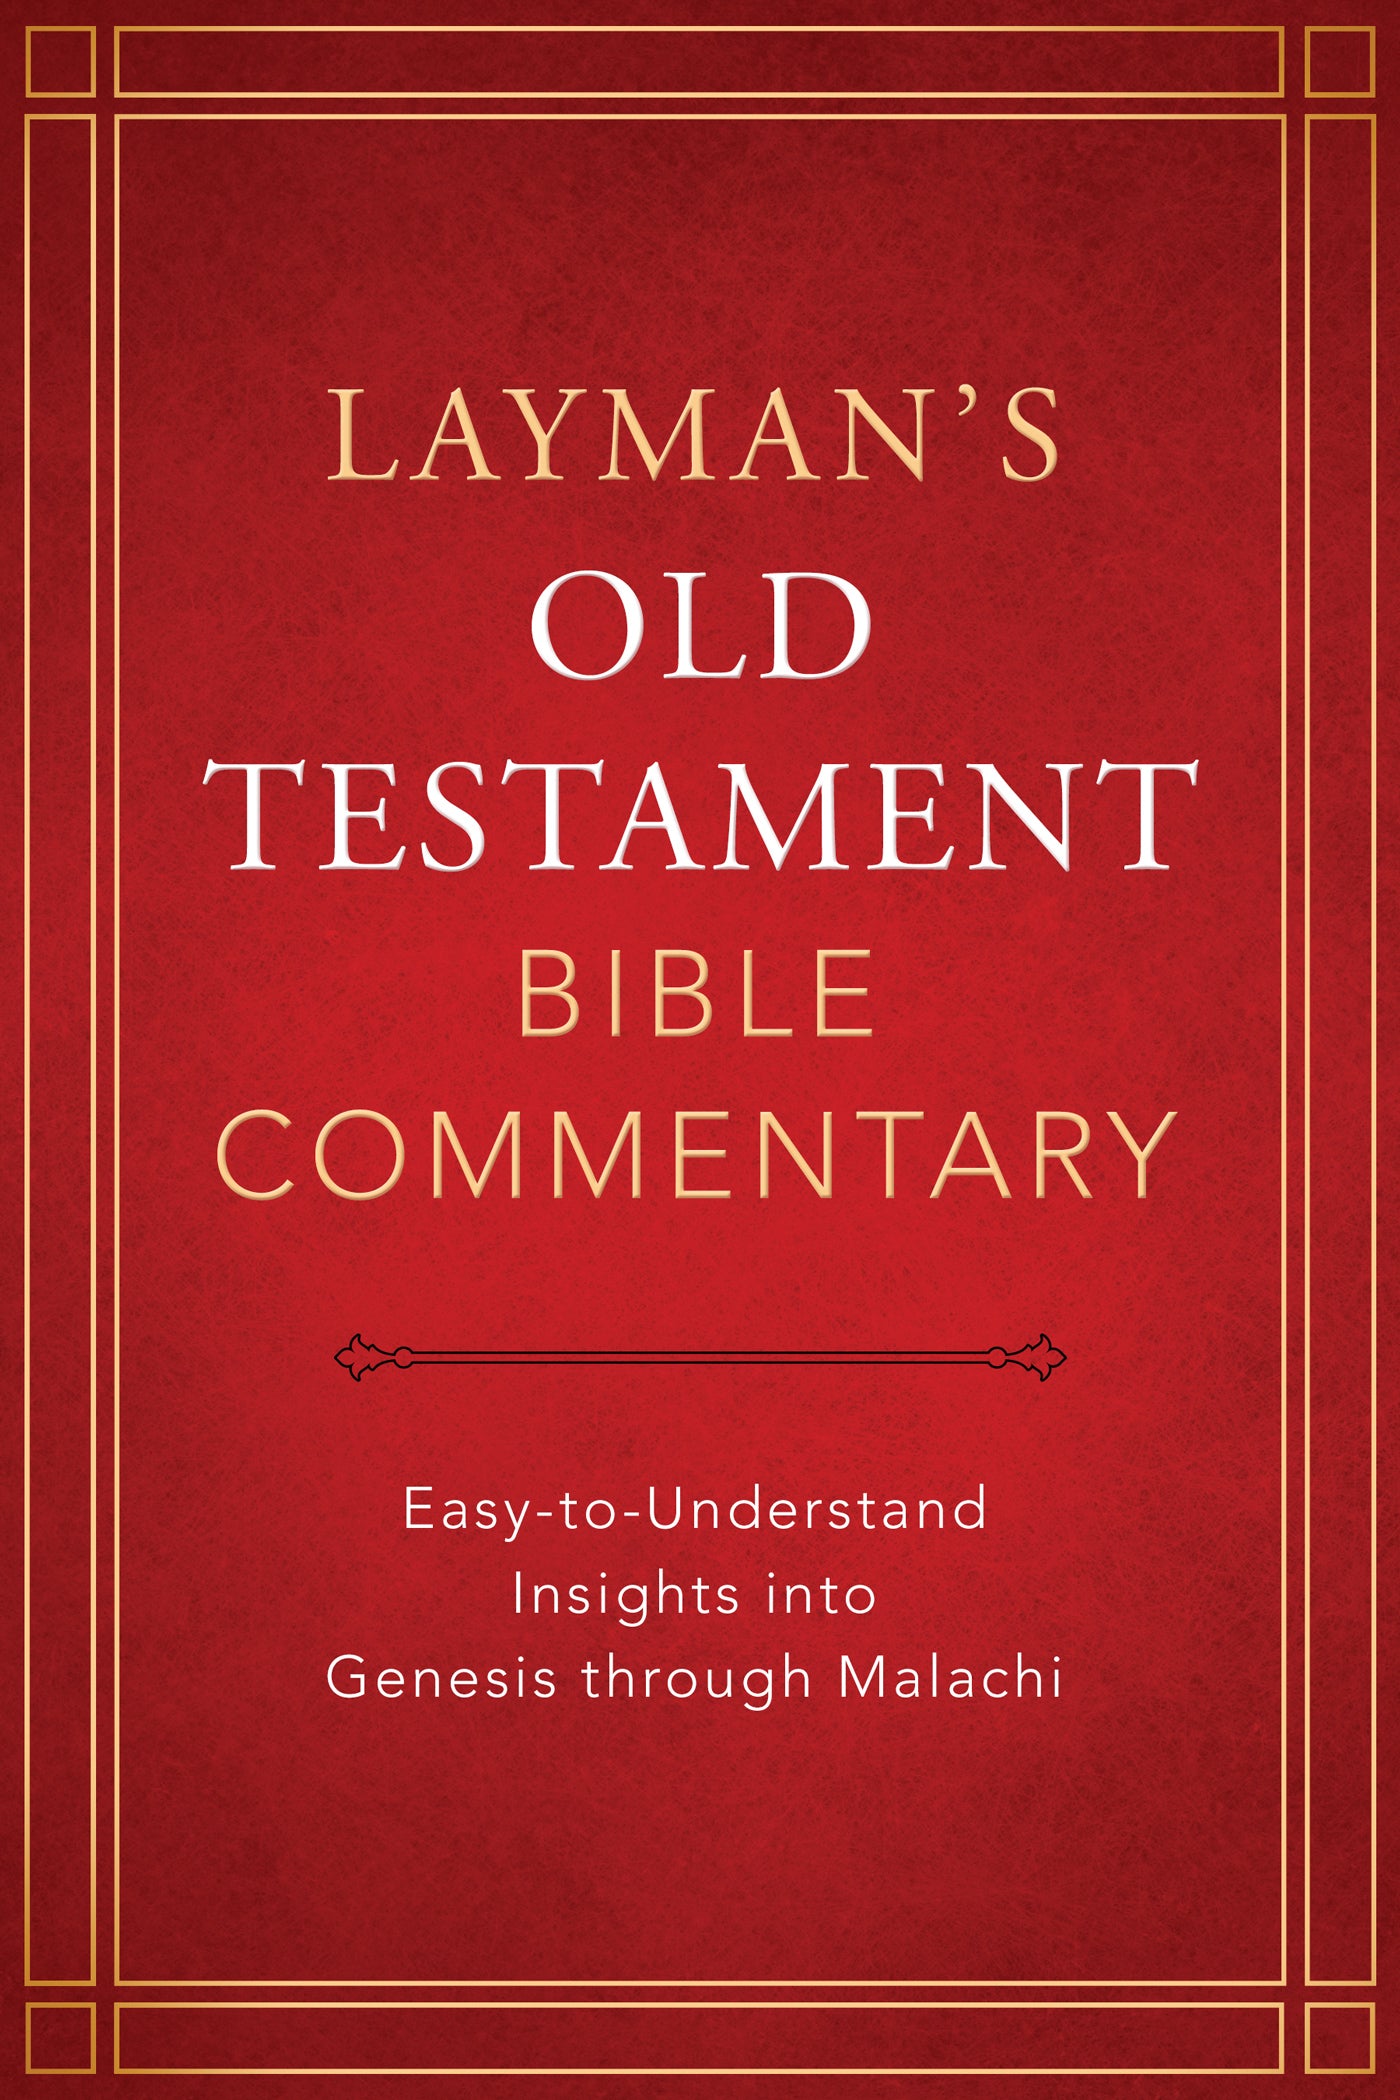 Layman's Old Testament Bible Commentary - The Christian Gift Company